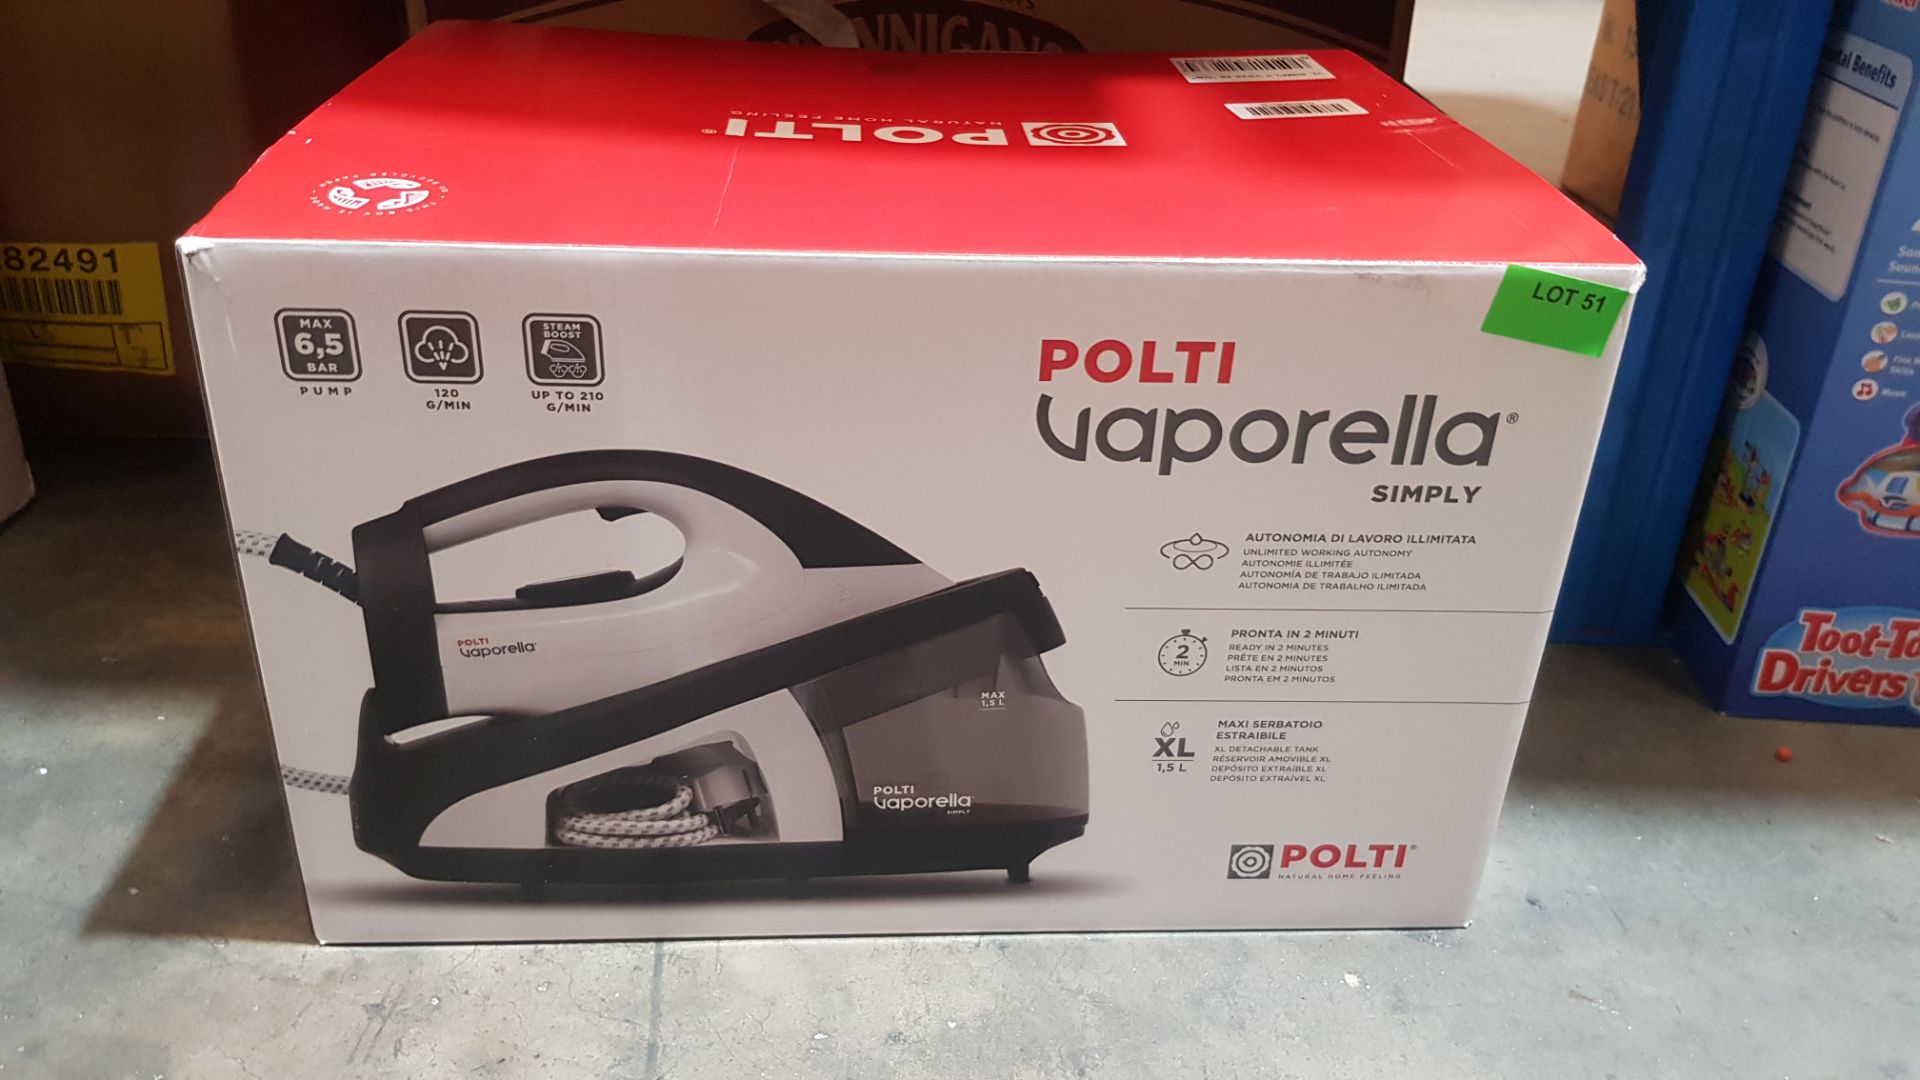 (R6D) Household. 1 X Polti Vapprella Simply Steam Iron. RRP £149 (New) - Image 2 of 2